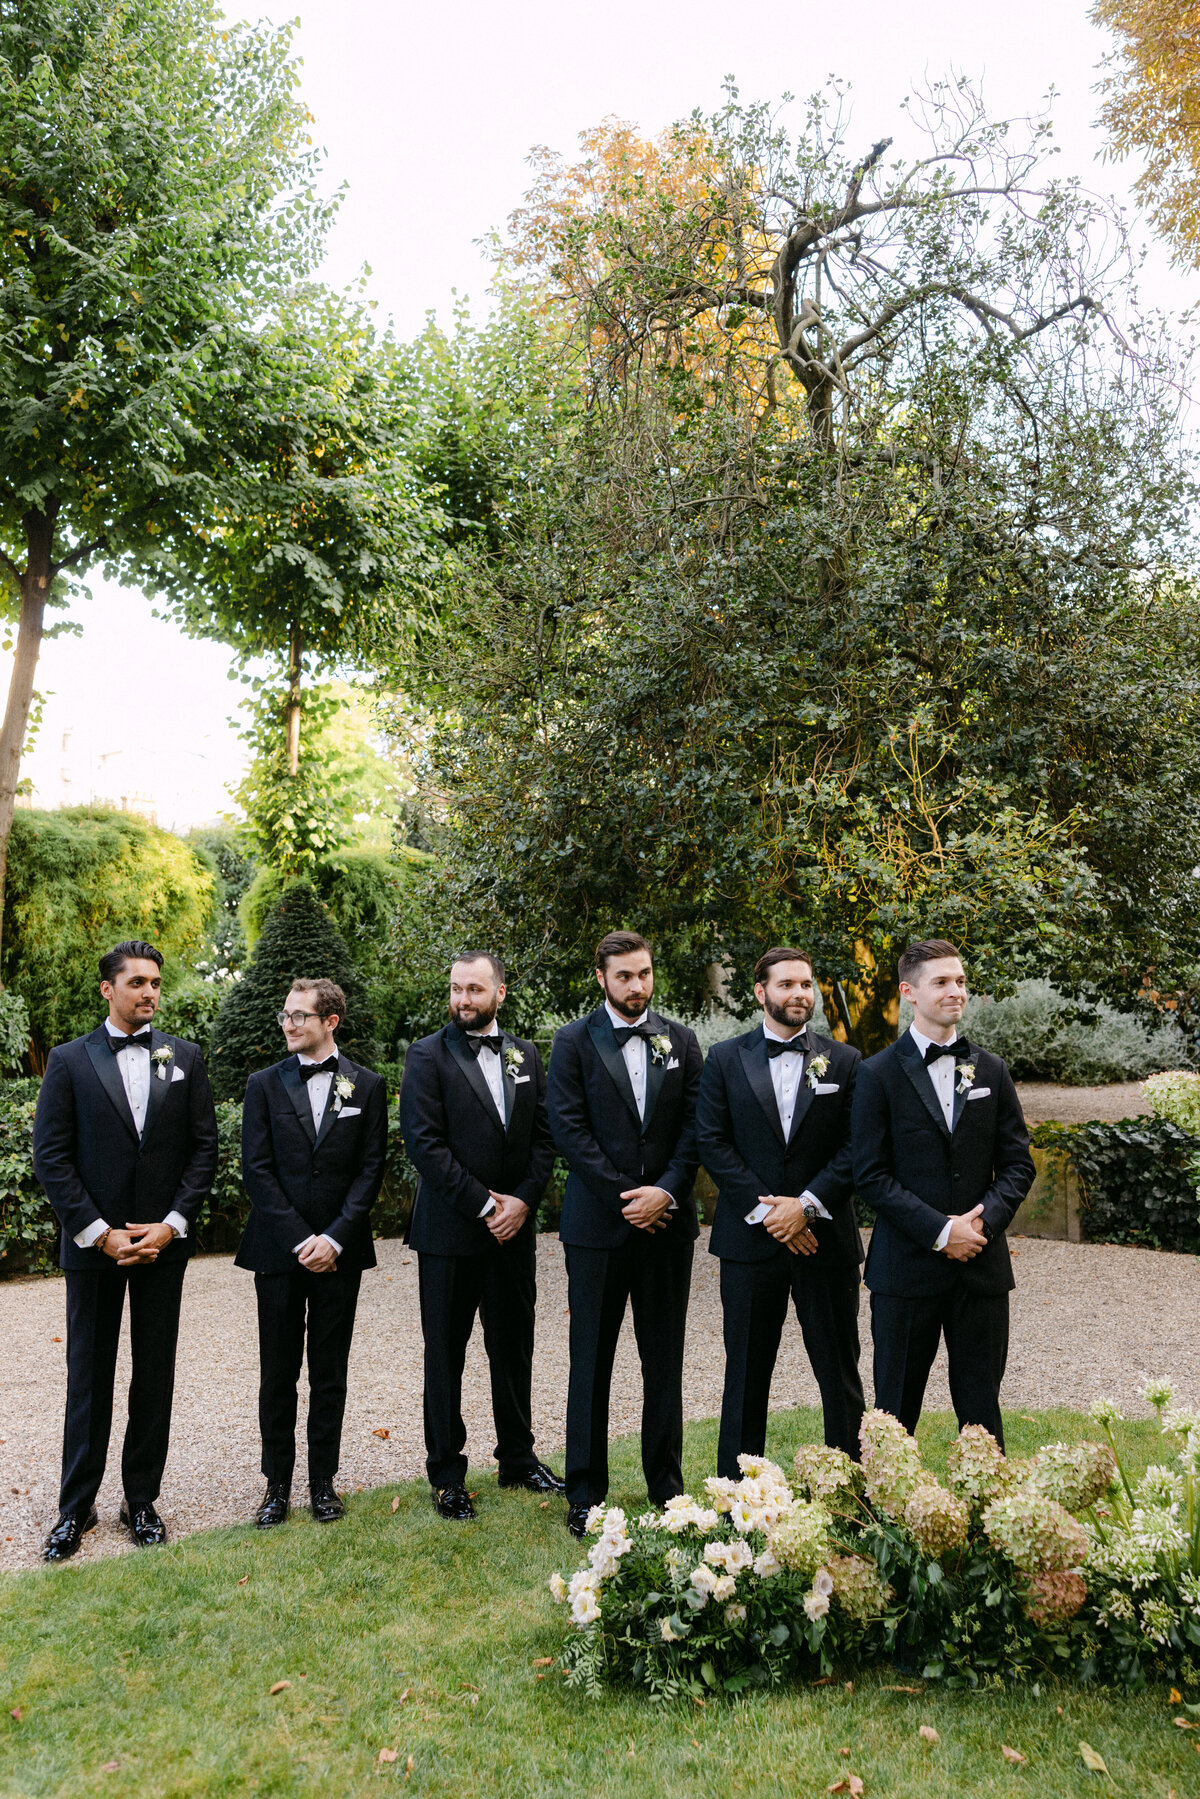 Jennifer Fox Weddings English speaking wedding planning & design agency in France crafting refined and bespoke weddings and celebrations Provence, Paris and destination wd529